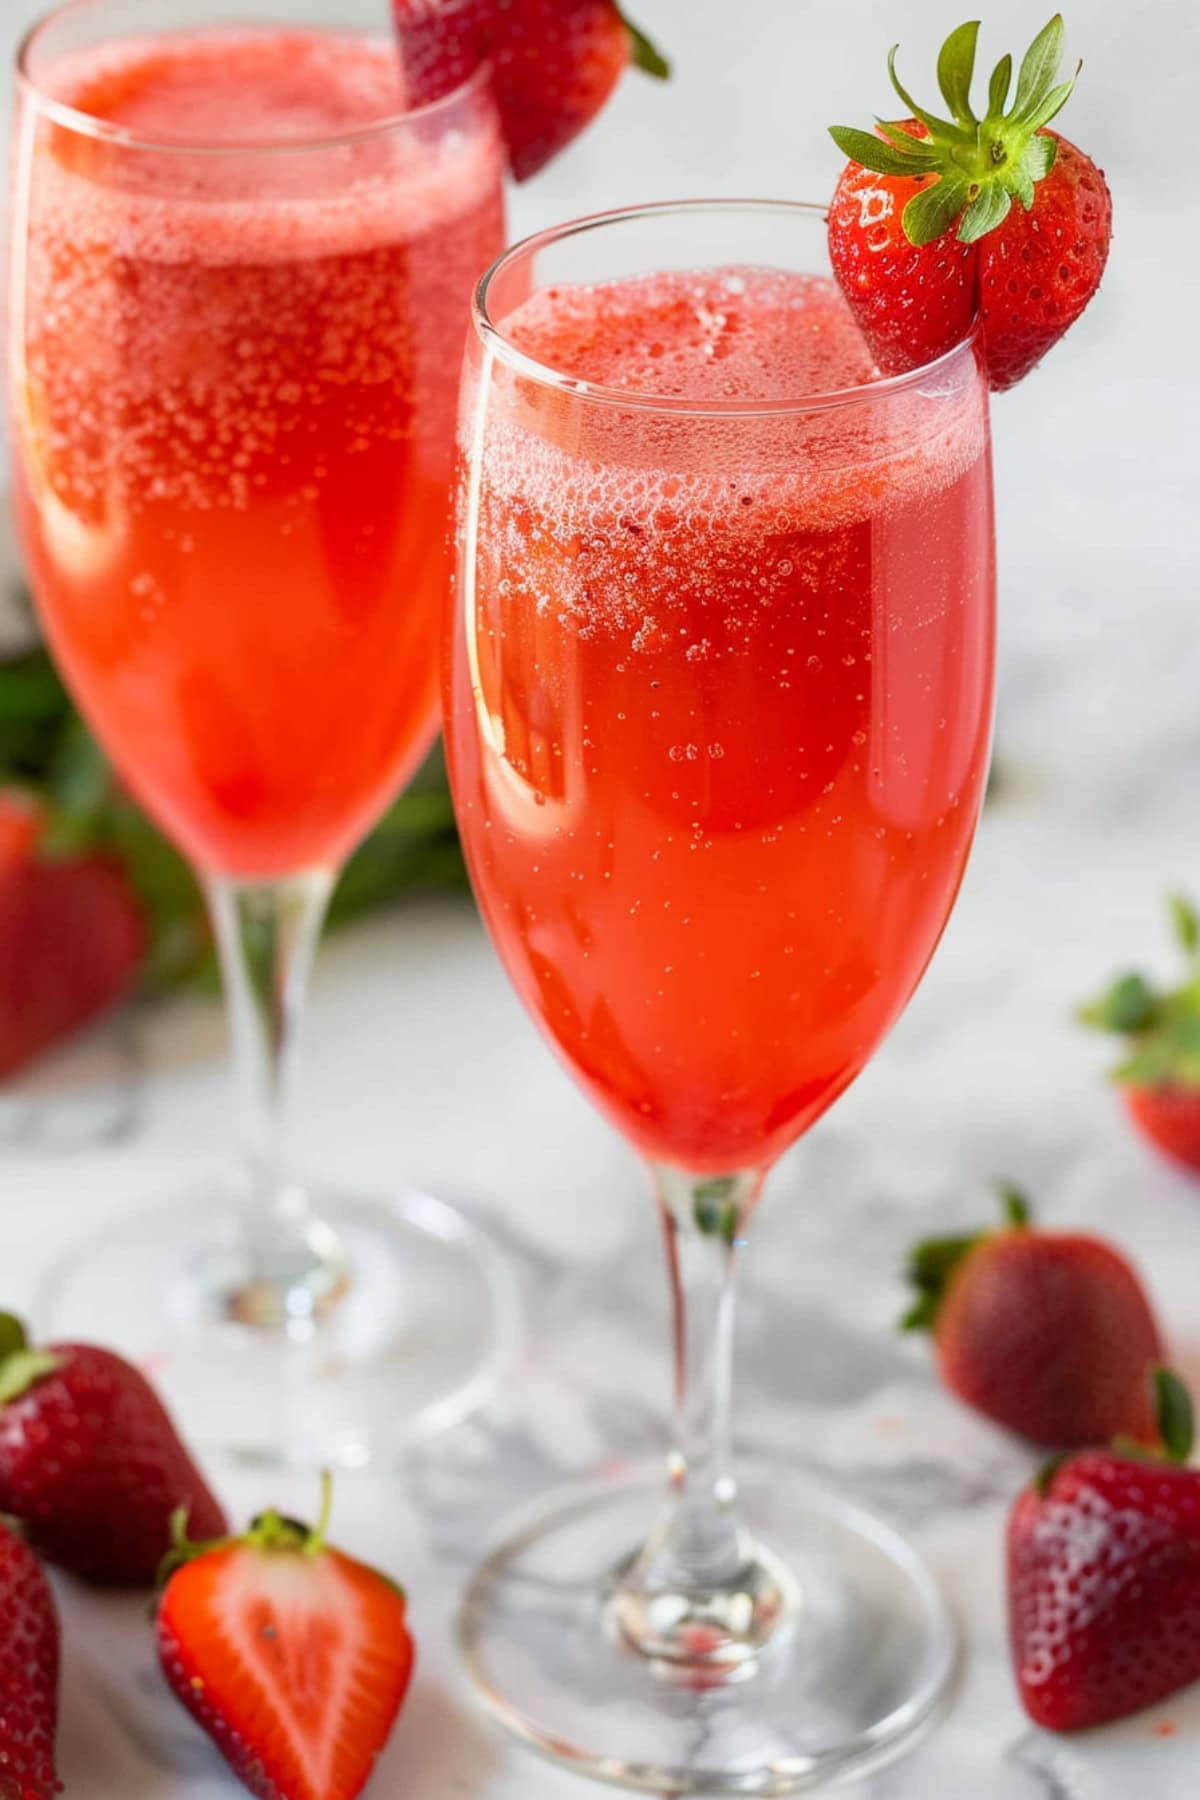 Two glasses of bubbly sparkling wine garnished with fresh strawberries.